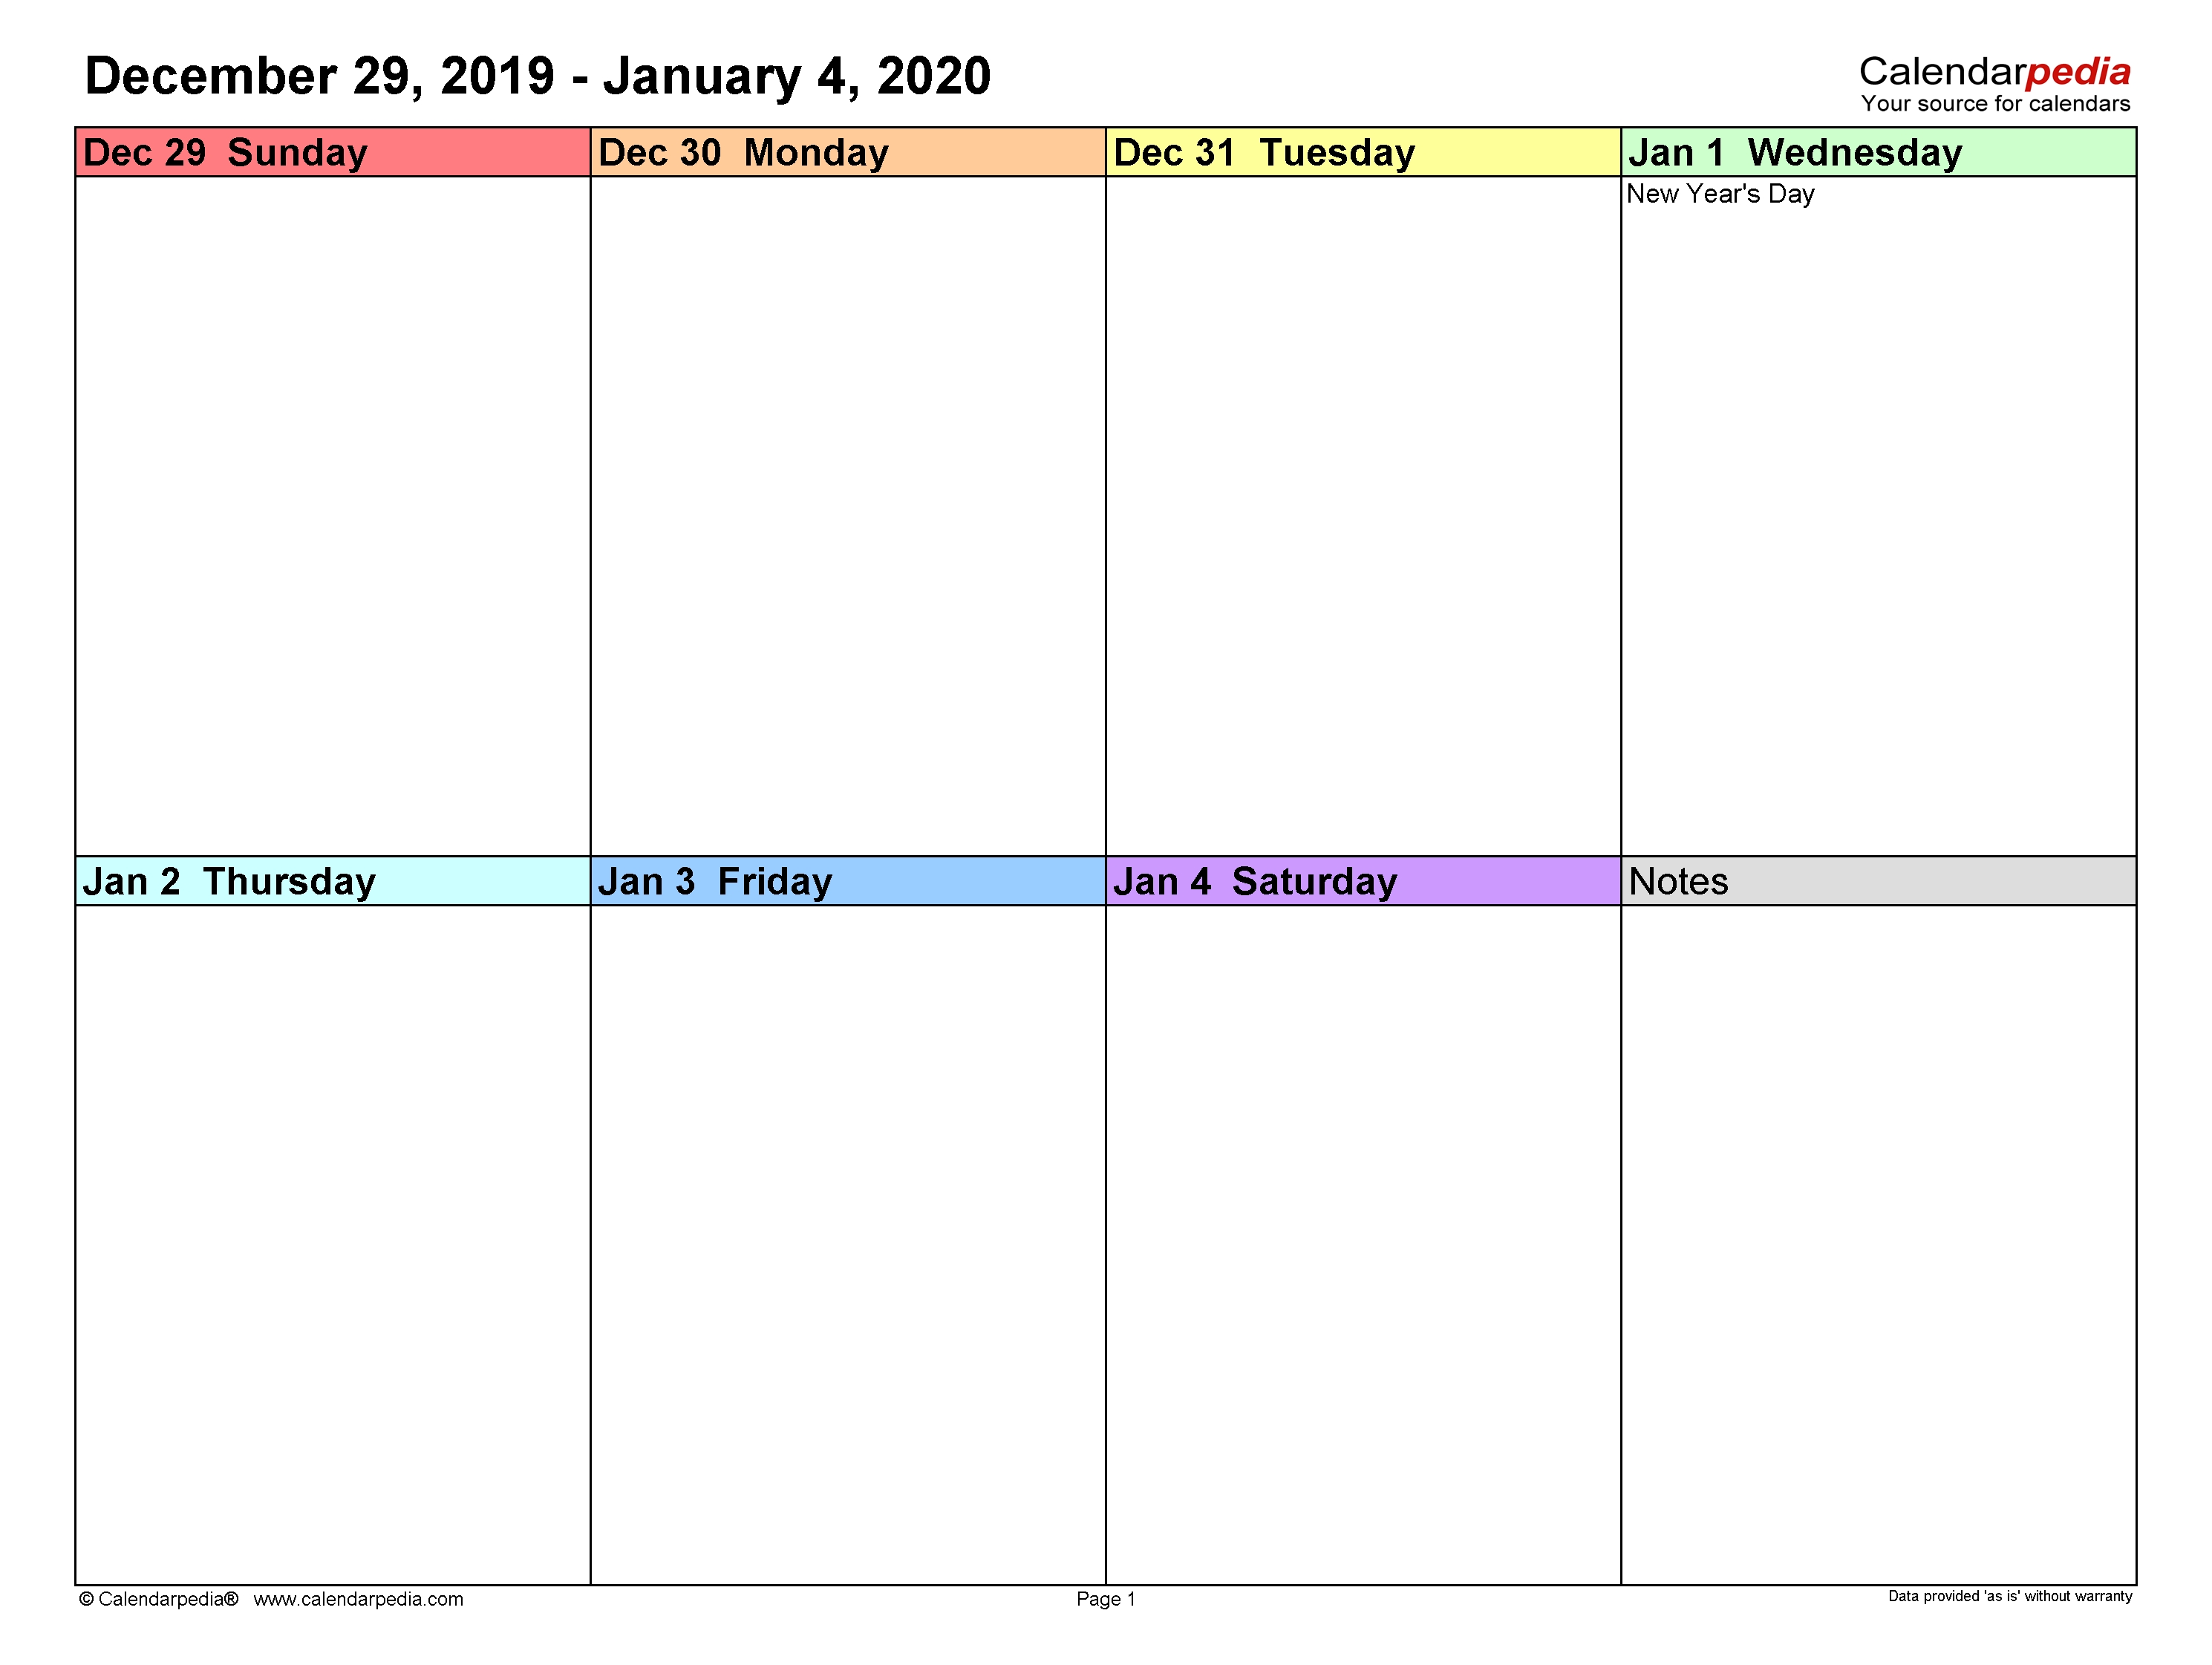 Weekly Calendars 2020 For Word - 12 Free Printable Templates-Day To Day Calendar Template 2020